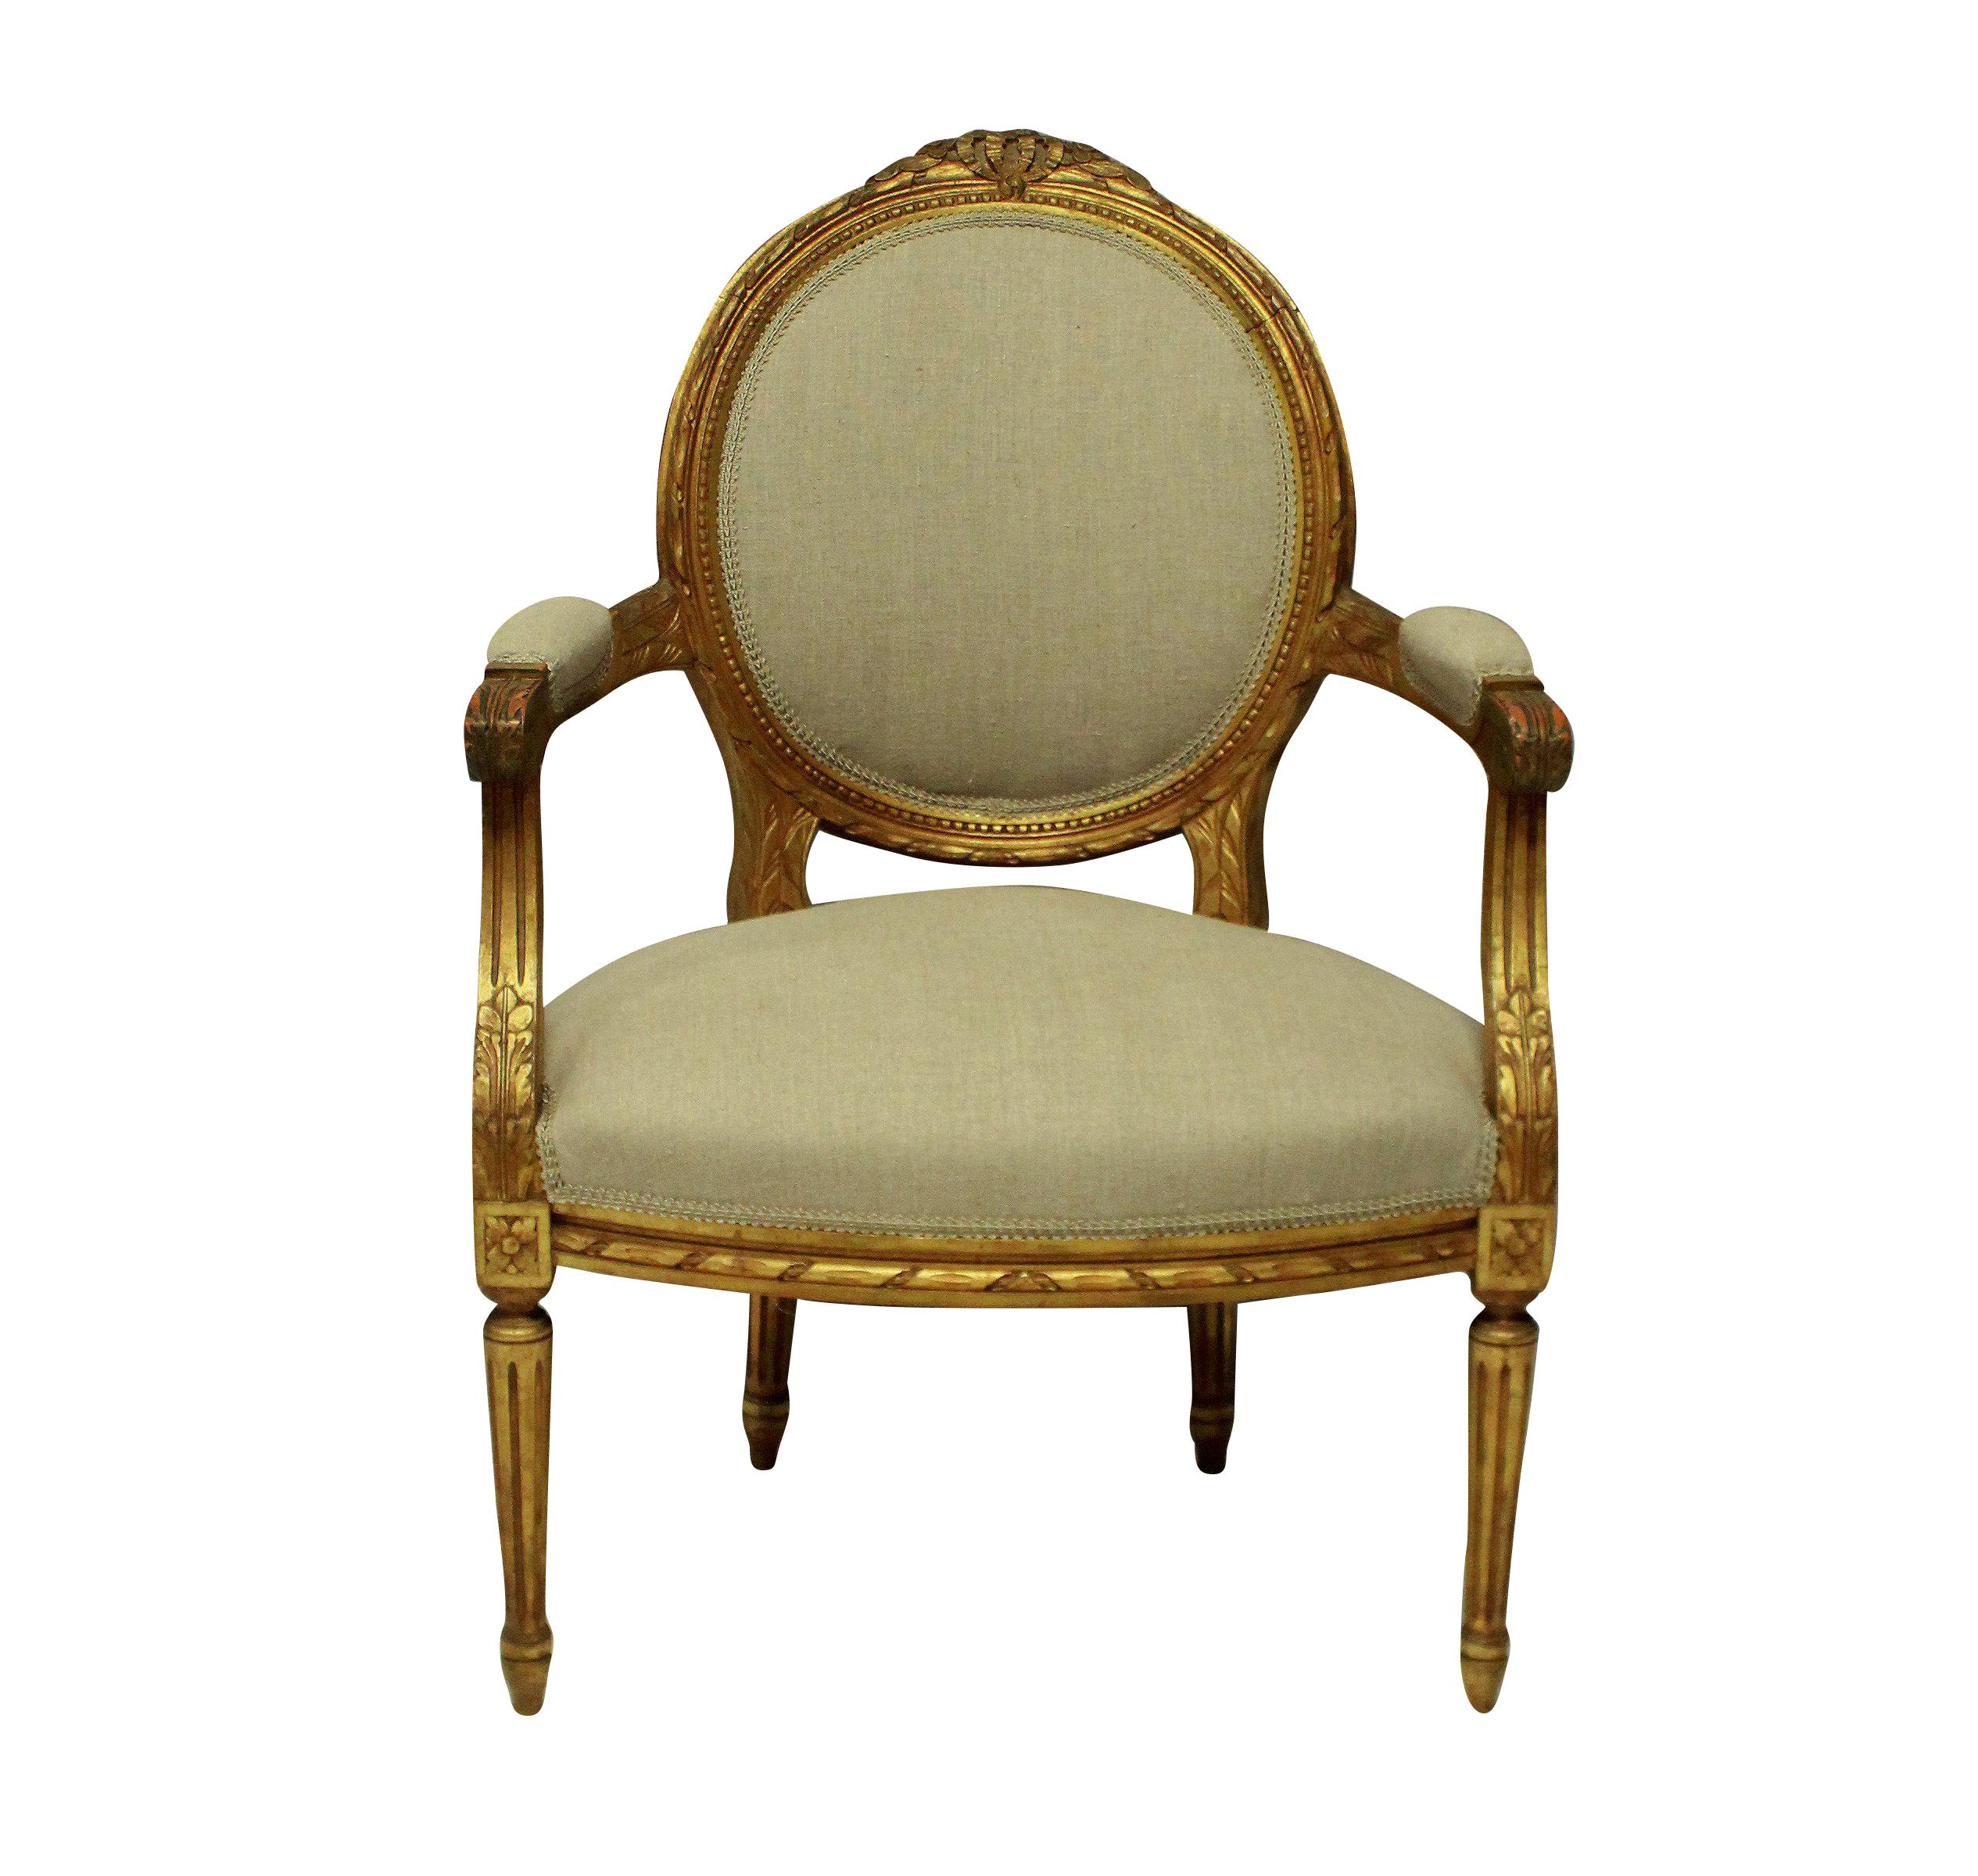 A pair of 19th century Louis XVI style giltwood armchairs, newly upholstered in raw linen.